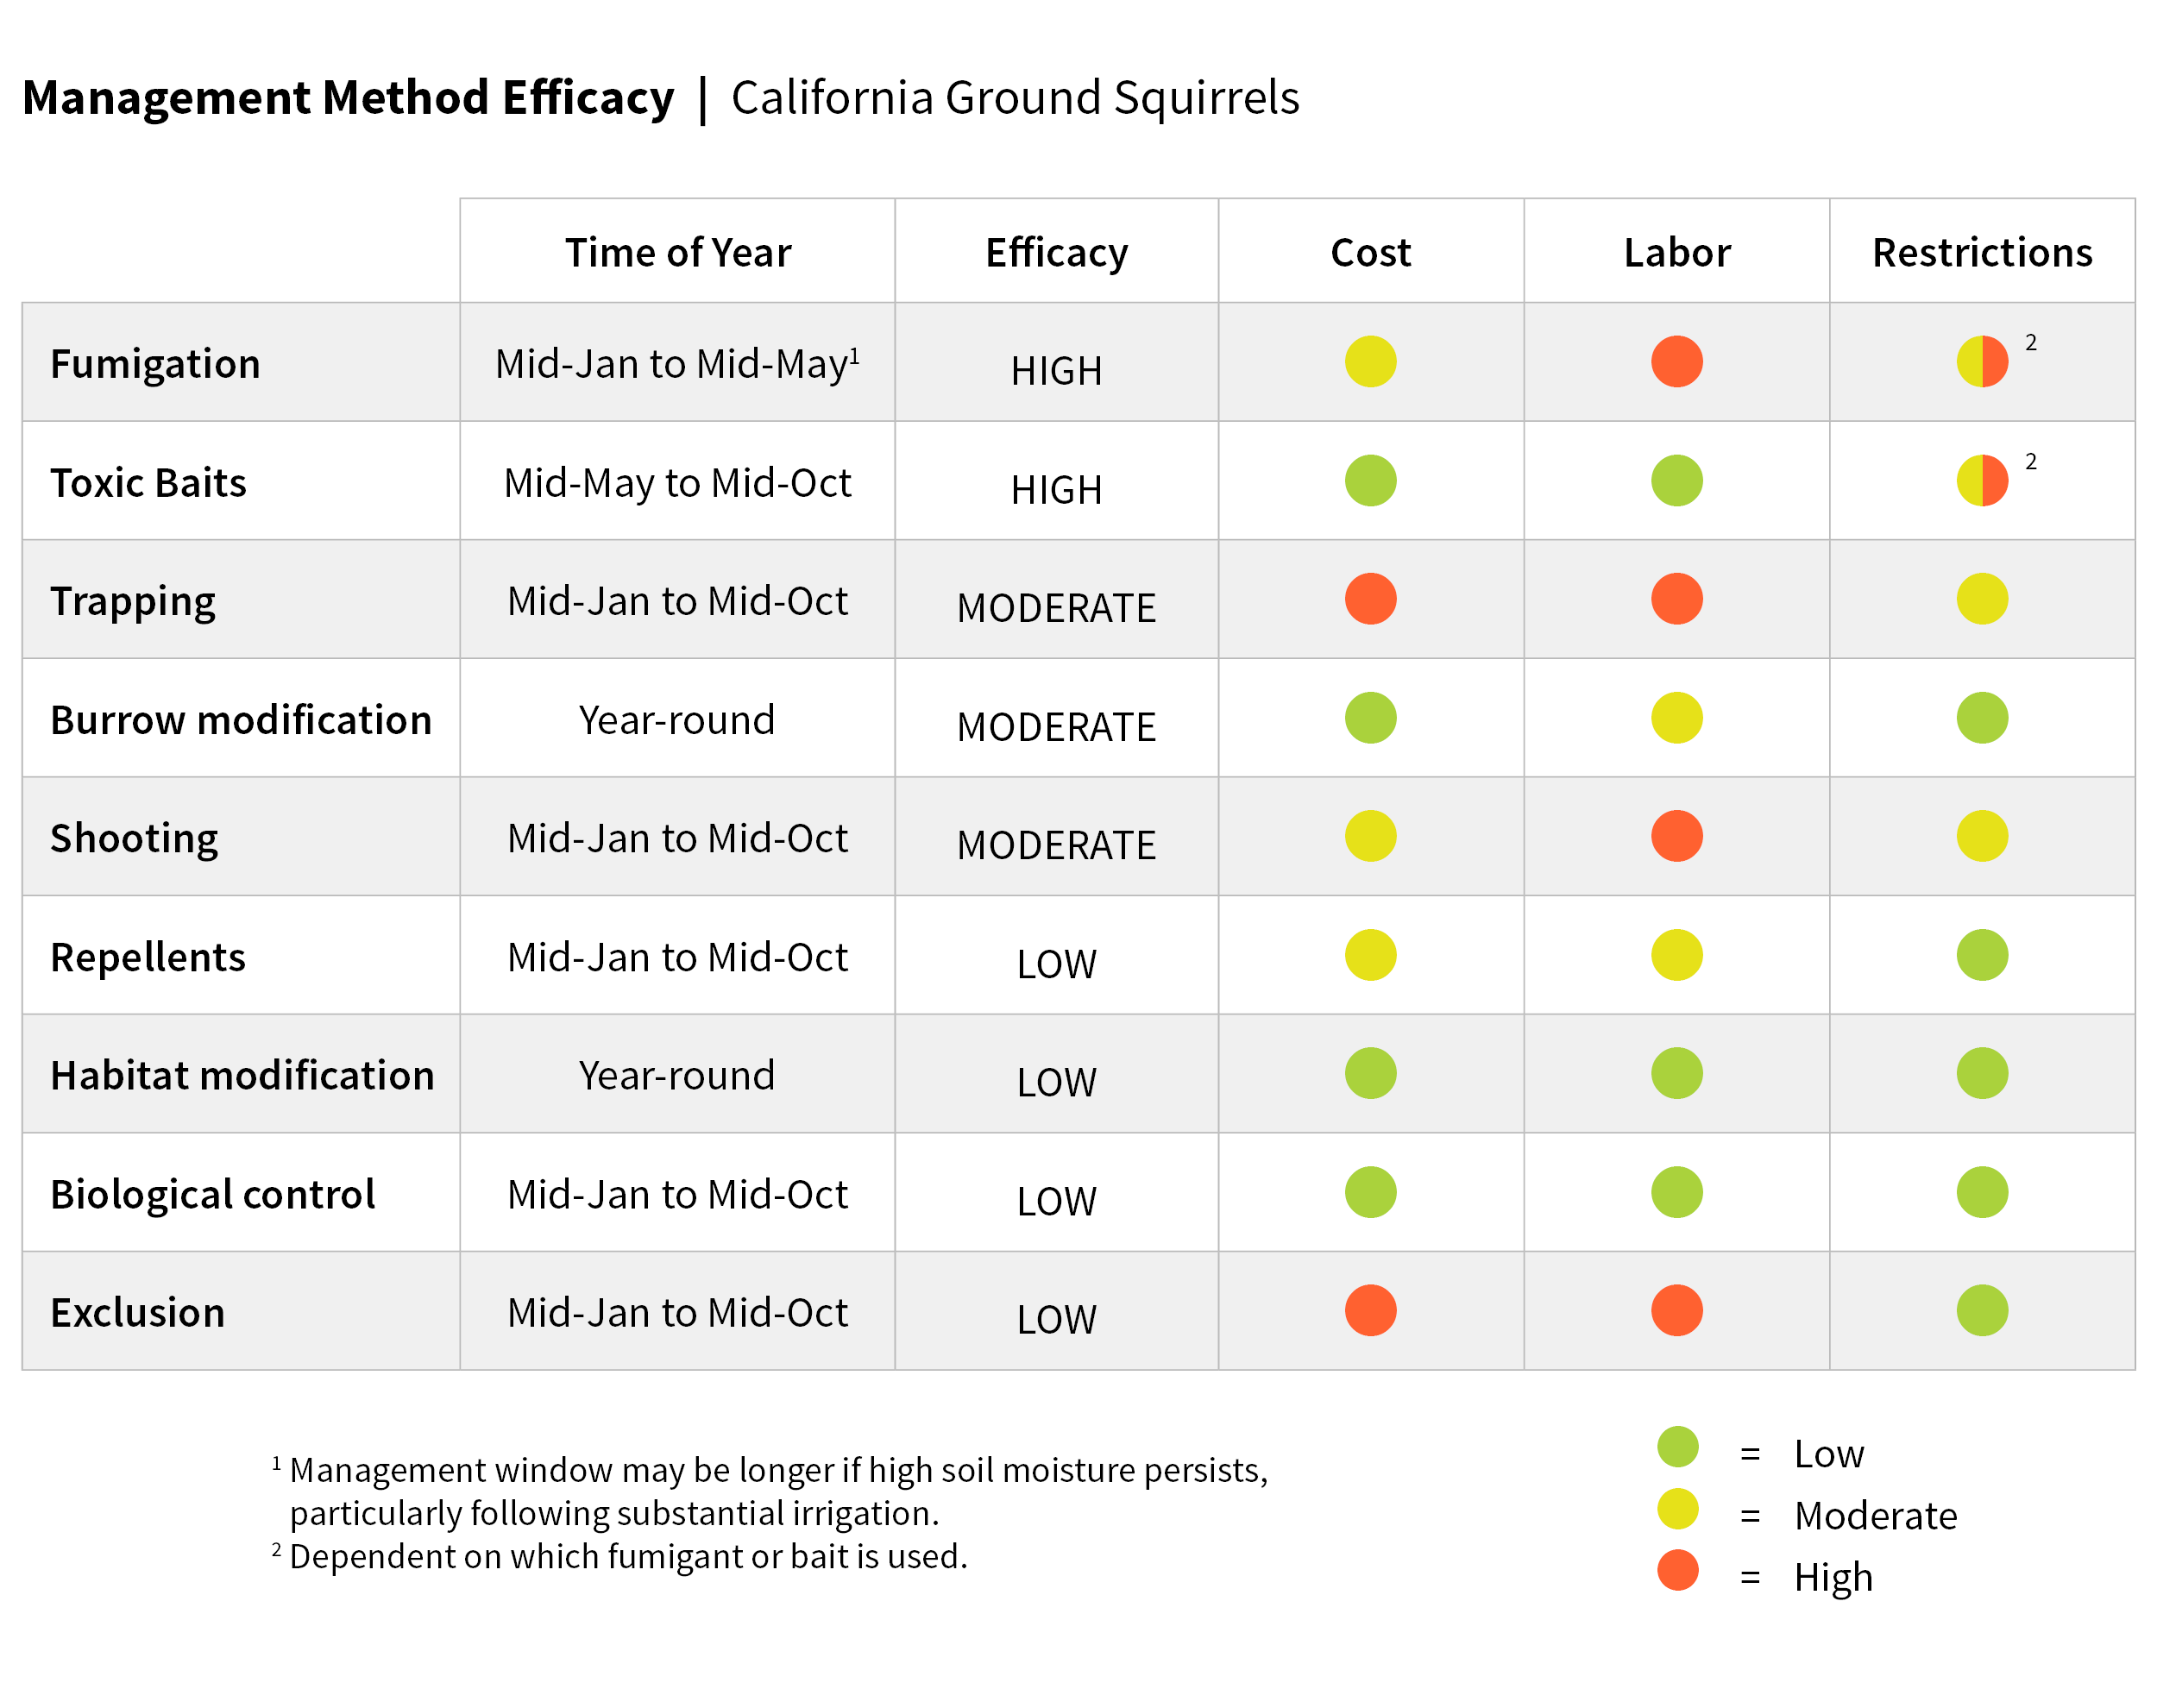 Management method efficiency chart for CA ground squirrel